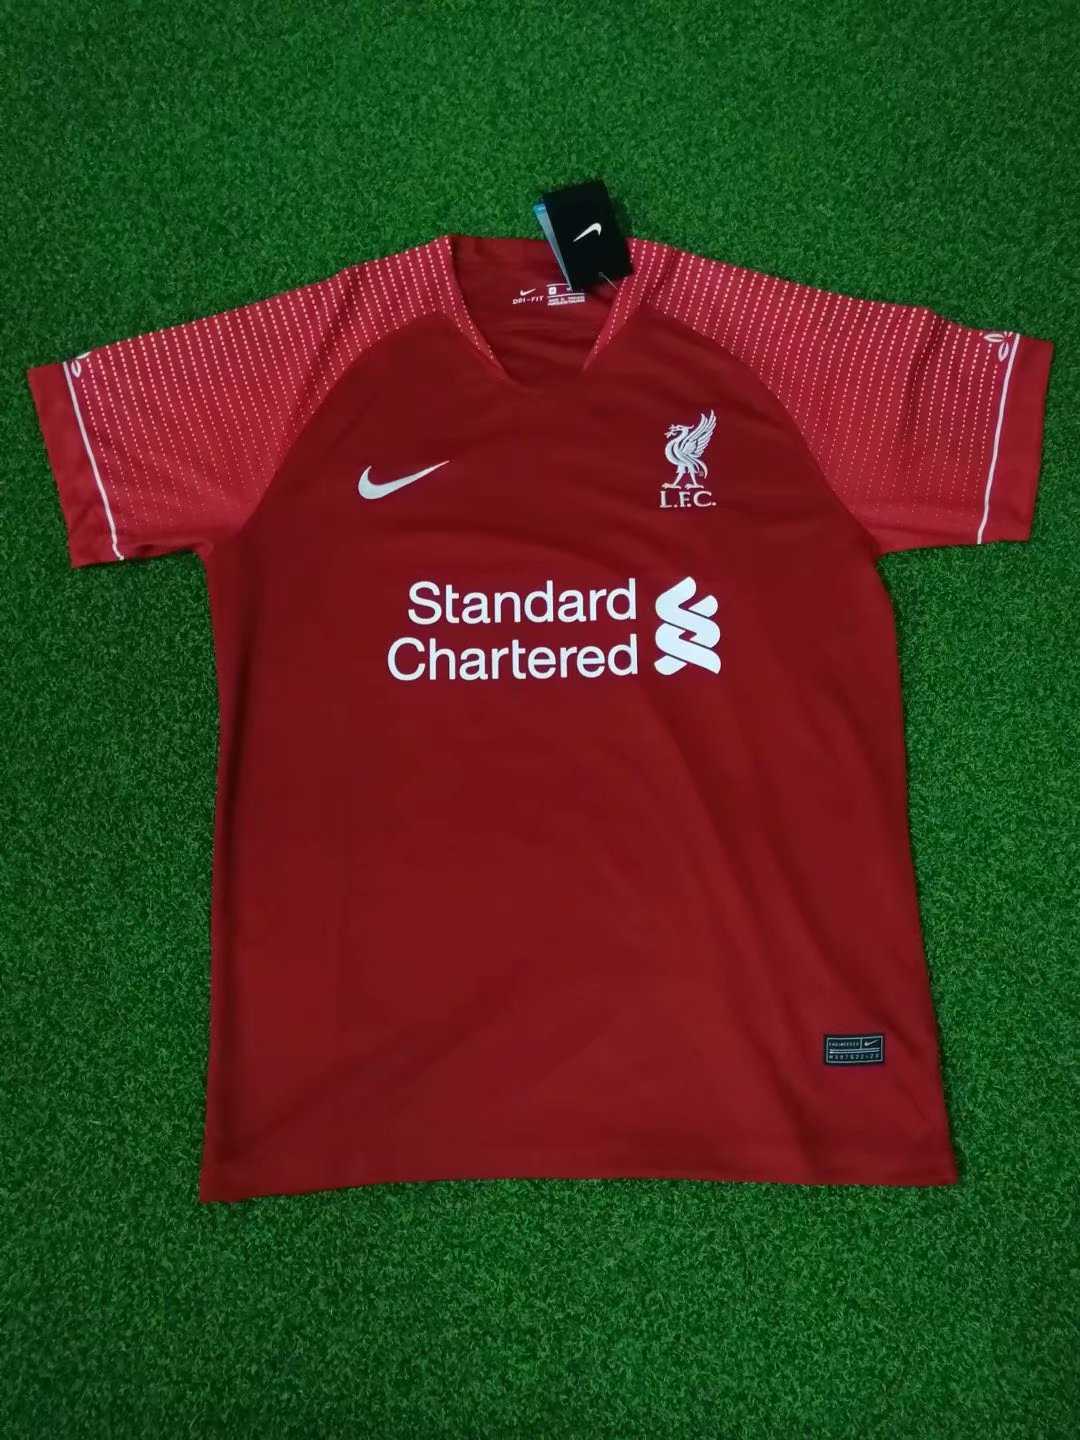 2020/21 Liverpool Red Mens Soccer Traning Jersey